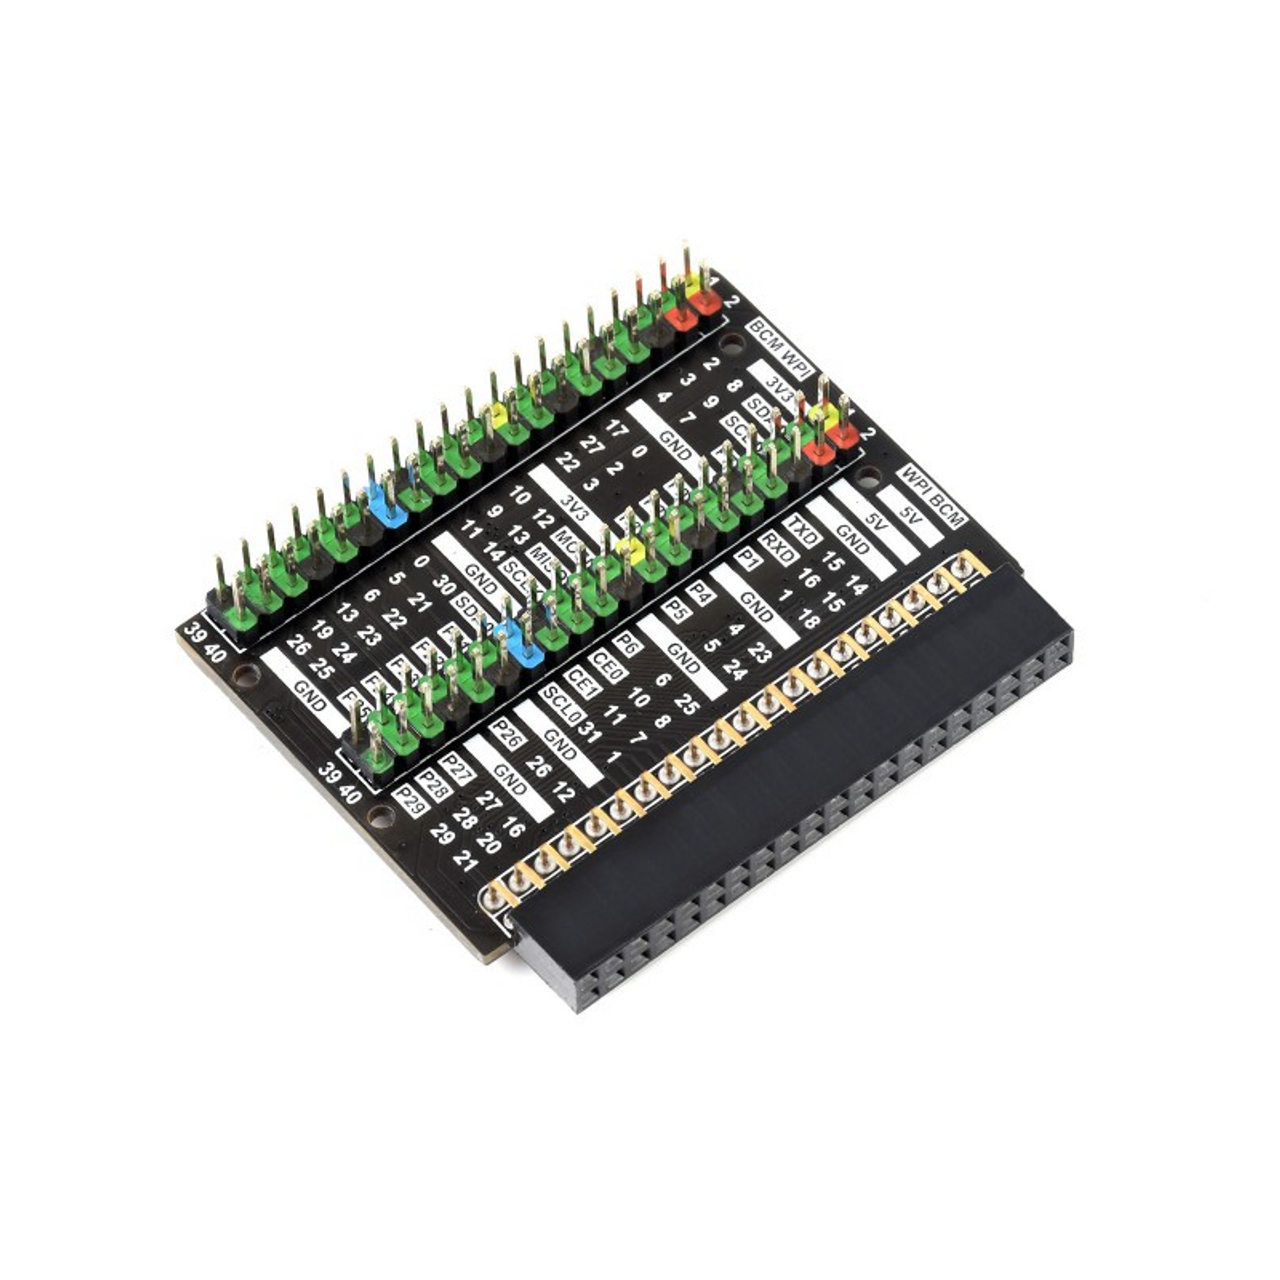 Raspberry Pi 400 GPIO Header Expansion Adapter, with Color-Coded